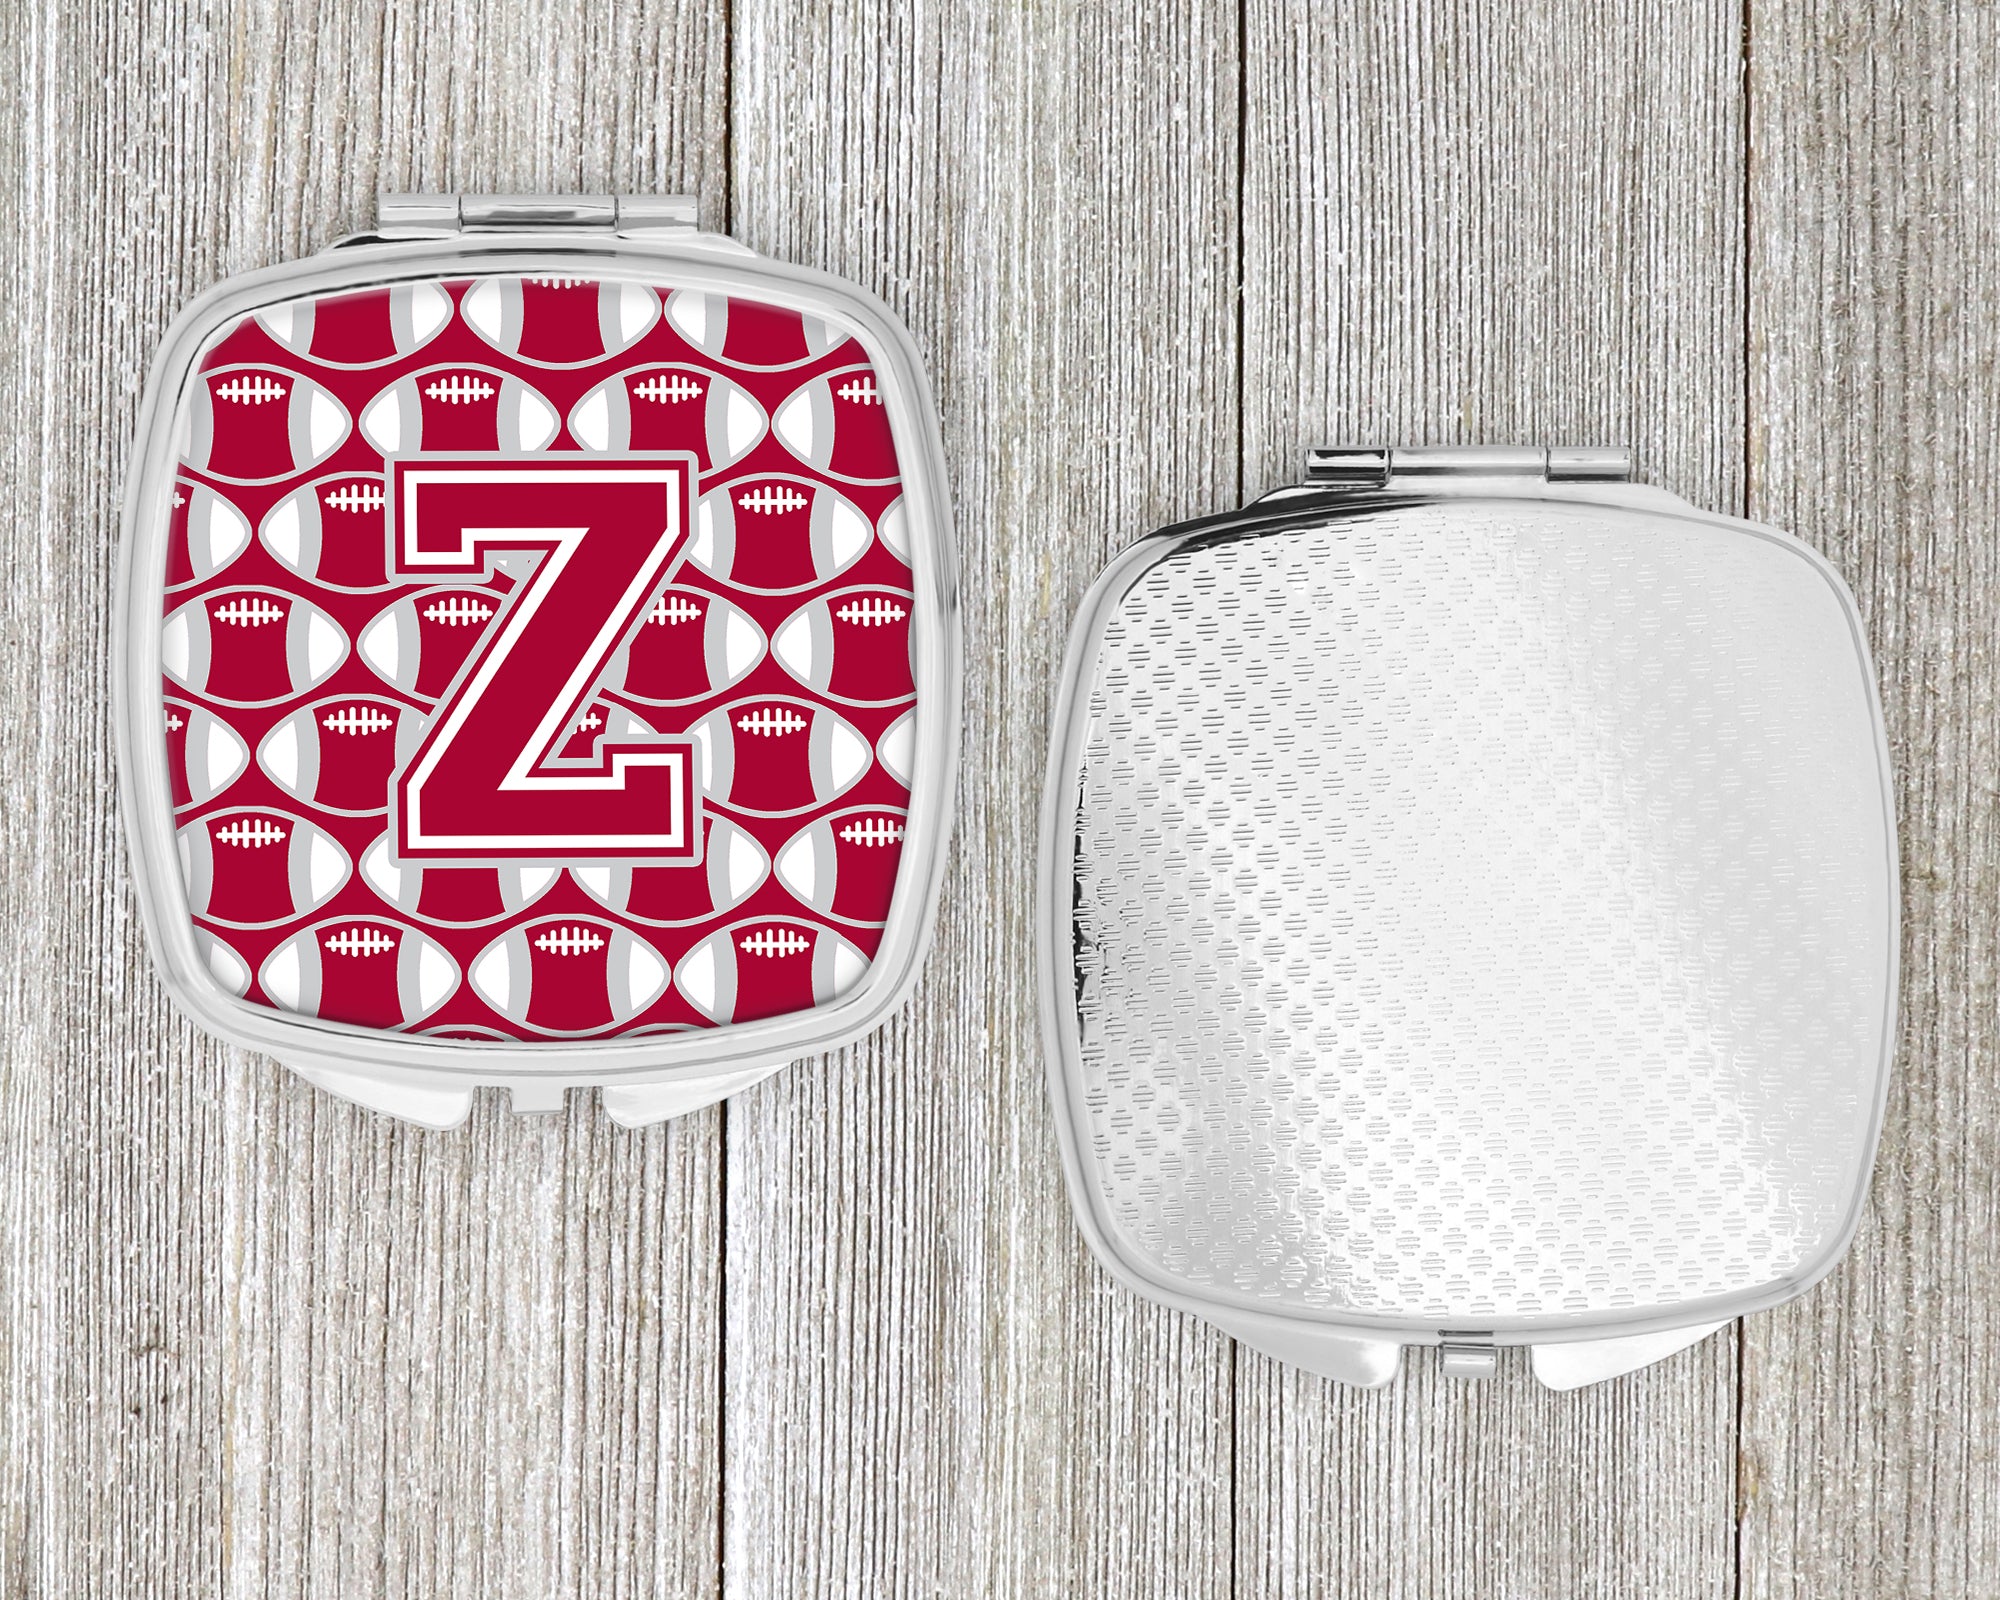 Letter Z Football Crimson, grey and white Compact Mirror CJ1065-ZSCM  the-store.com.